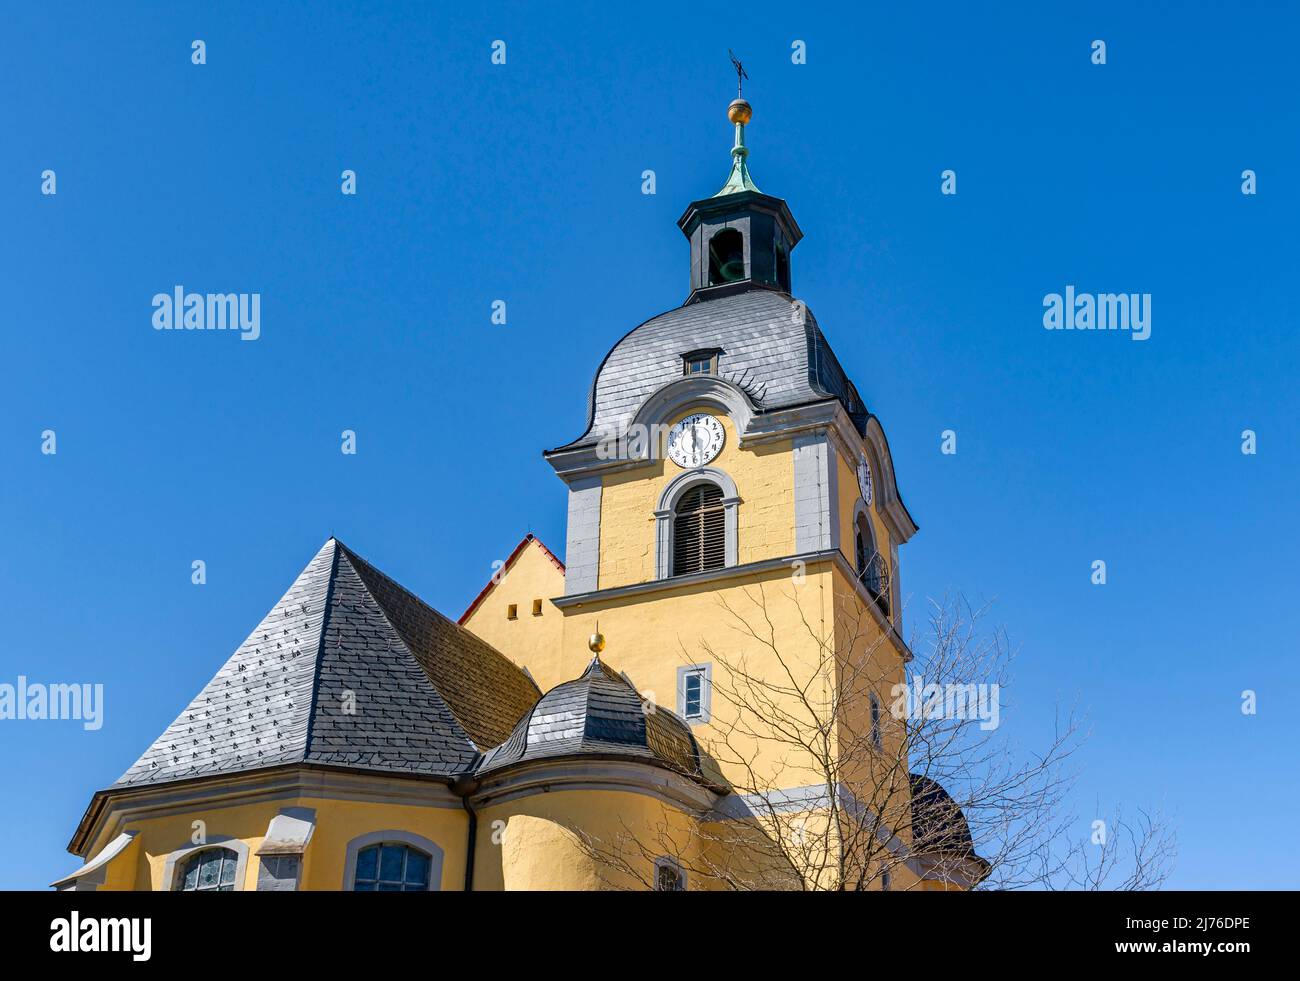 Germany, Suhl, St. Mary's Lutheran Church is the oldest church in the city of Suhl. The church was built between 1487 and 1491. The church tower has a square ground plan and a Welsh dome. Stock Photo